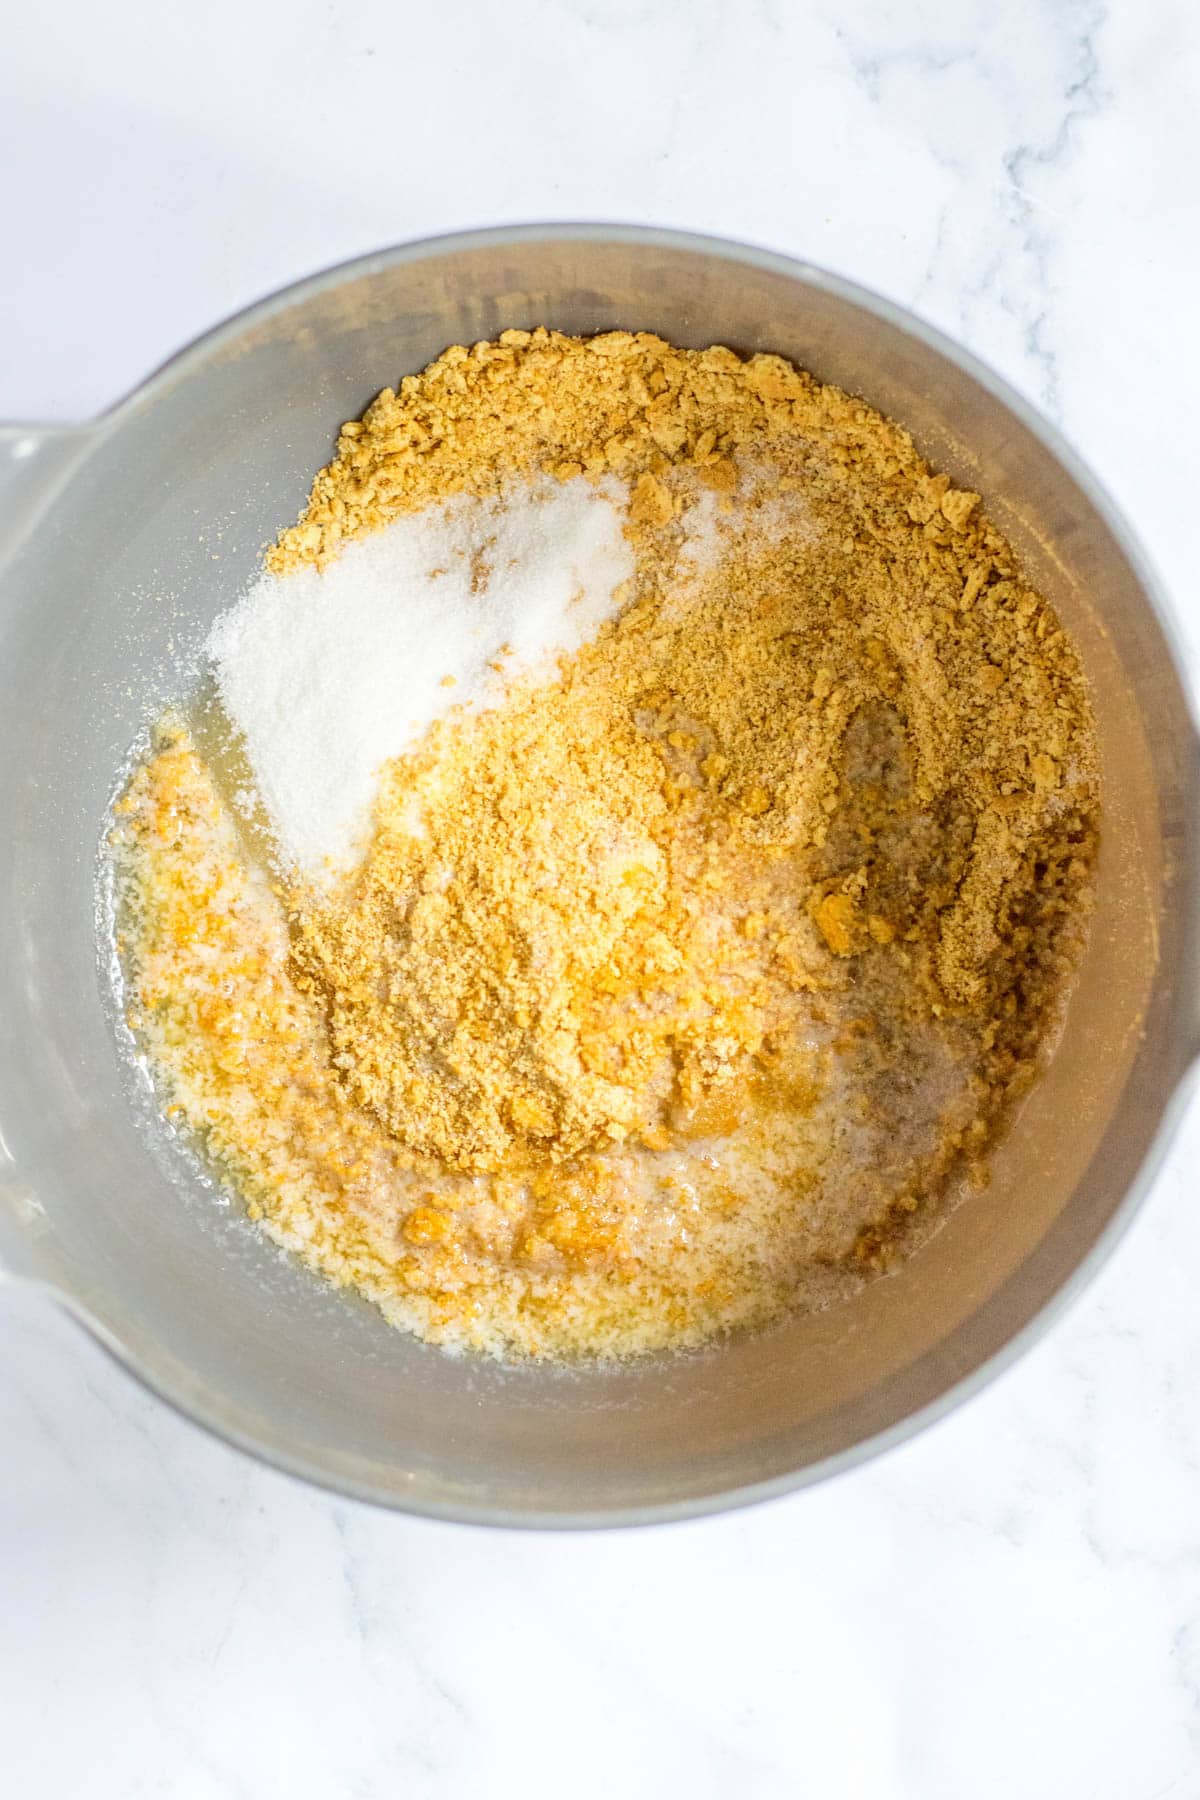 Graham cracker crumbs, sugar and butter in mixing bowl